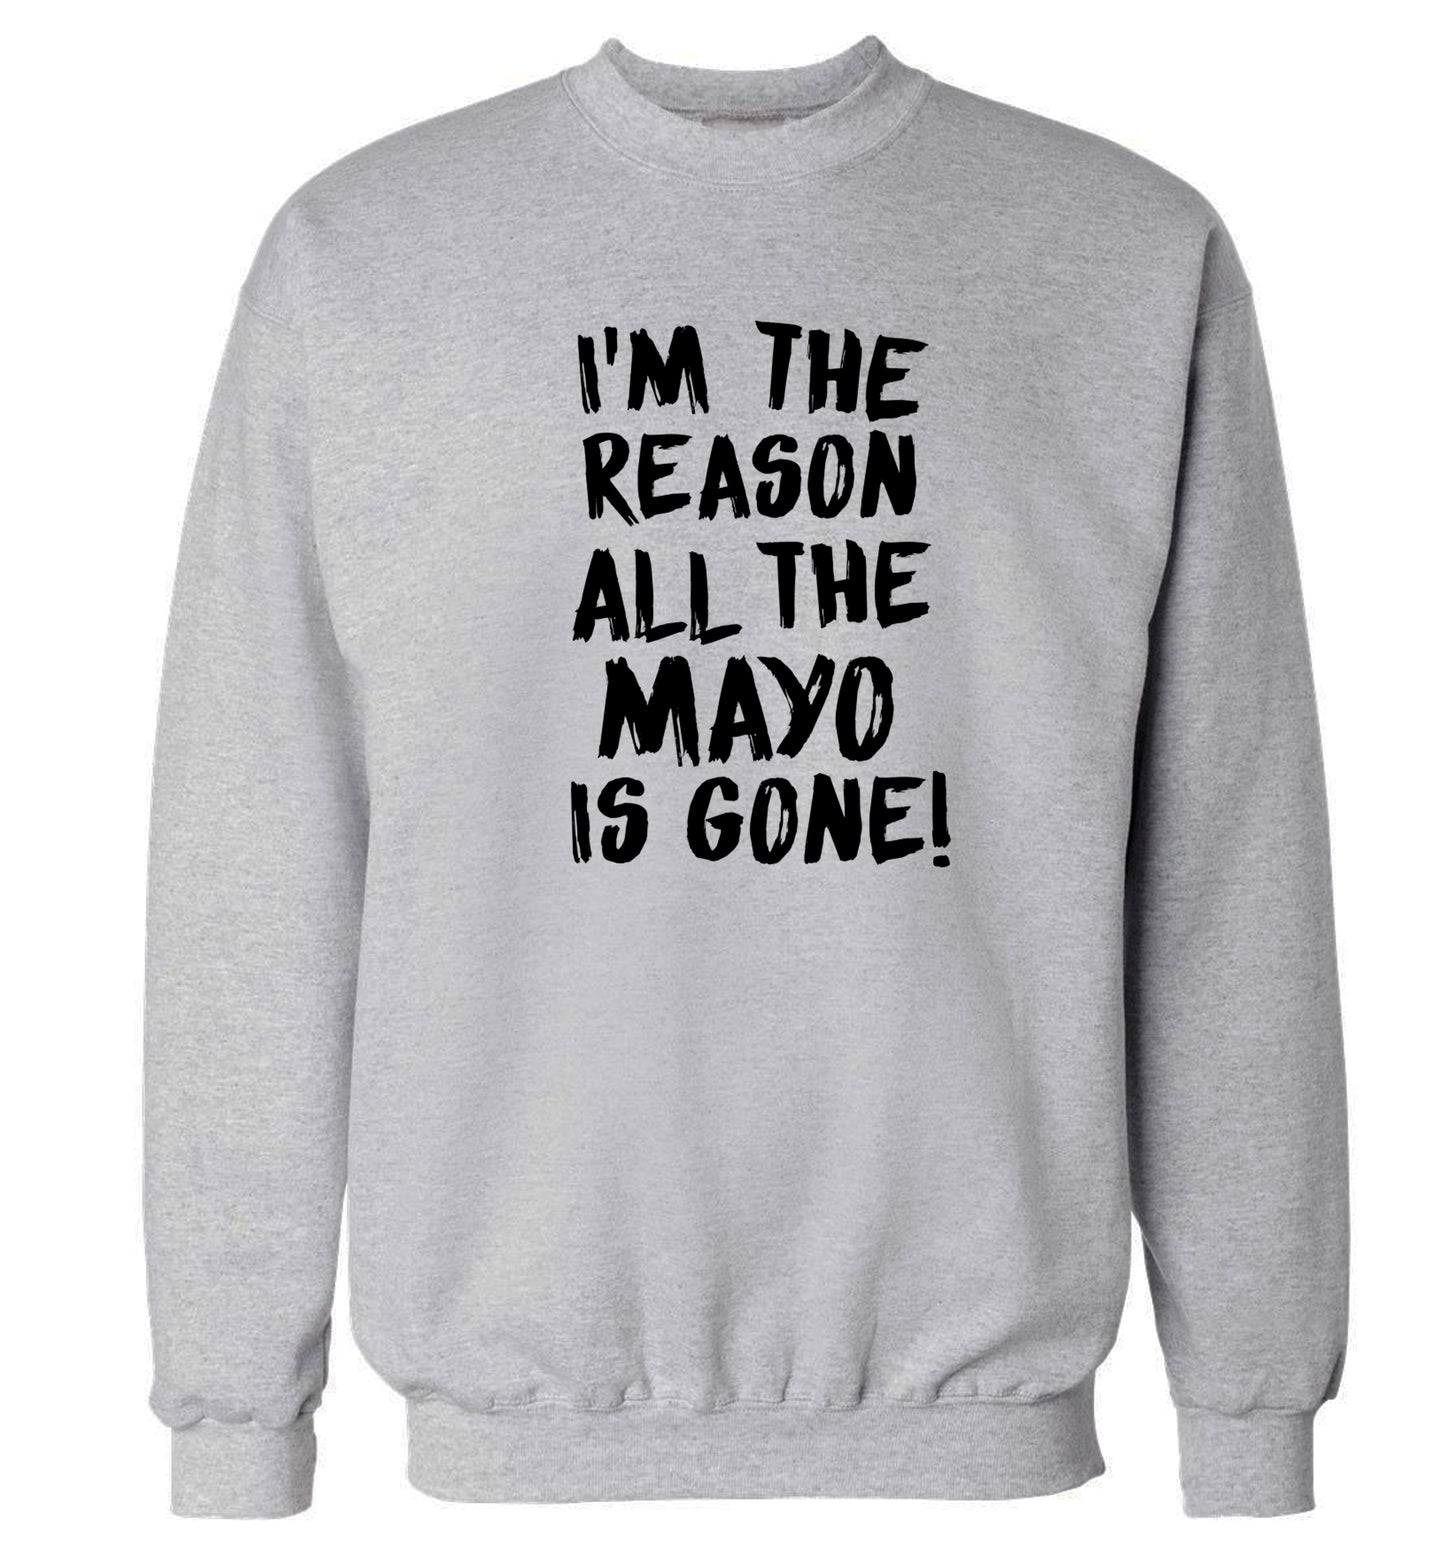 I'm the reason why all the mayo is gone Adult's unisex grey Sweater 2XL